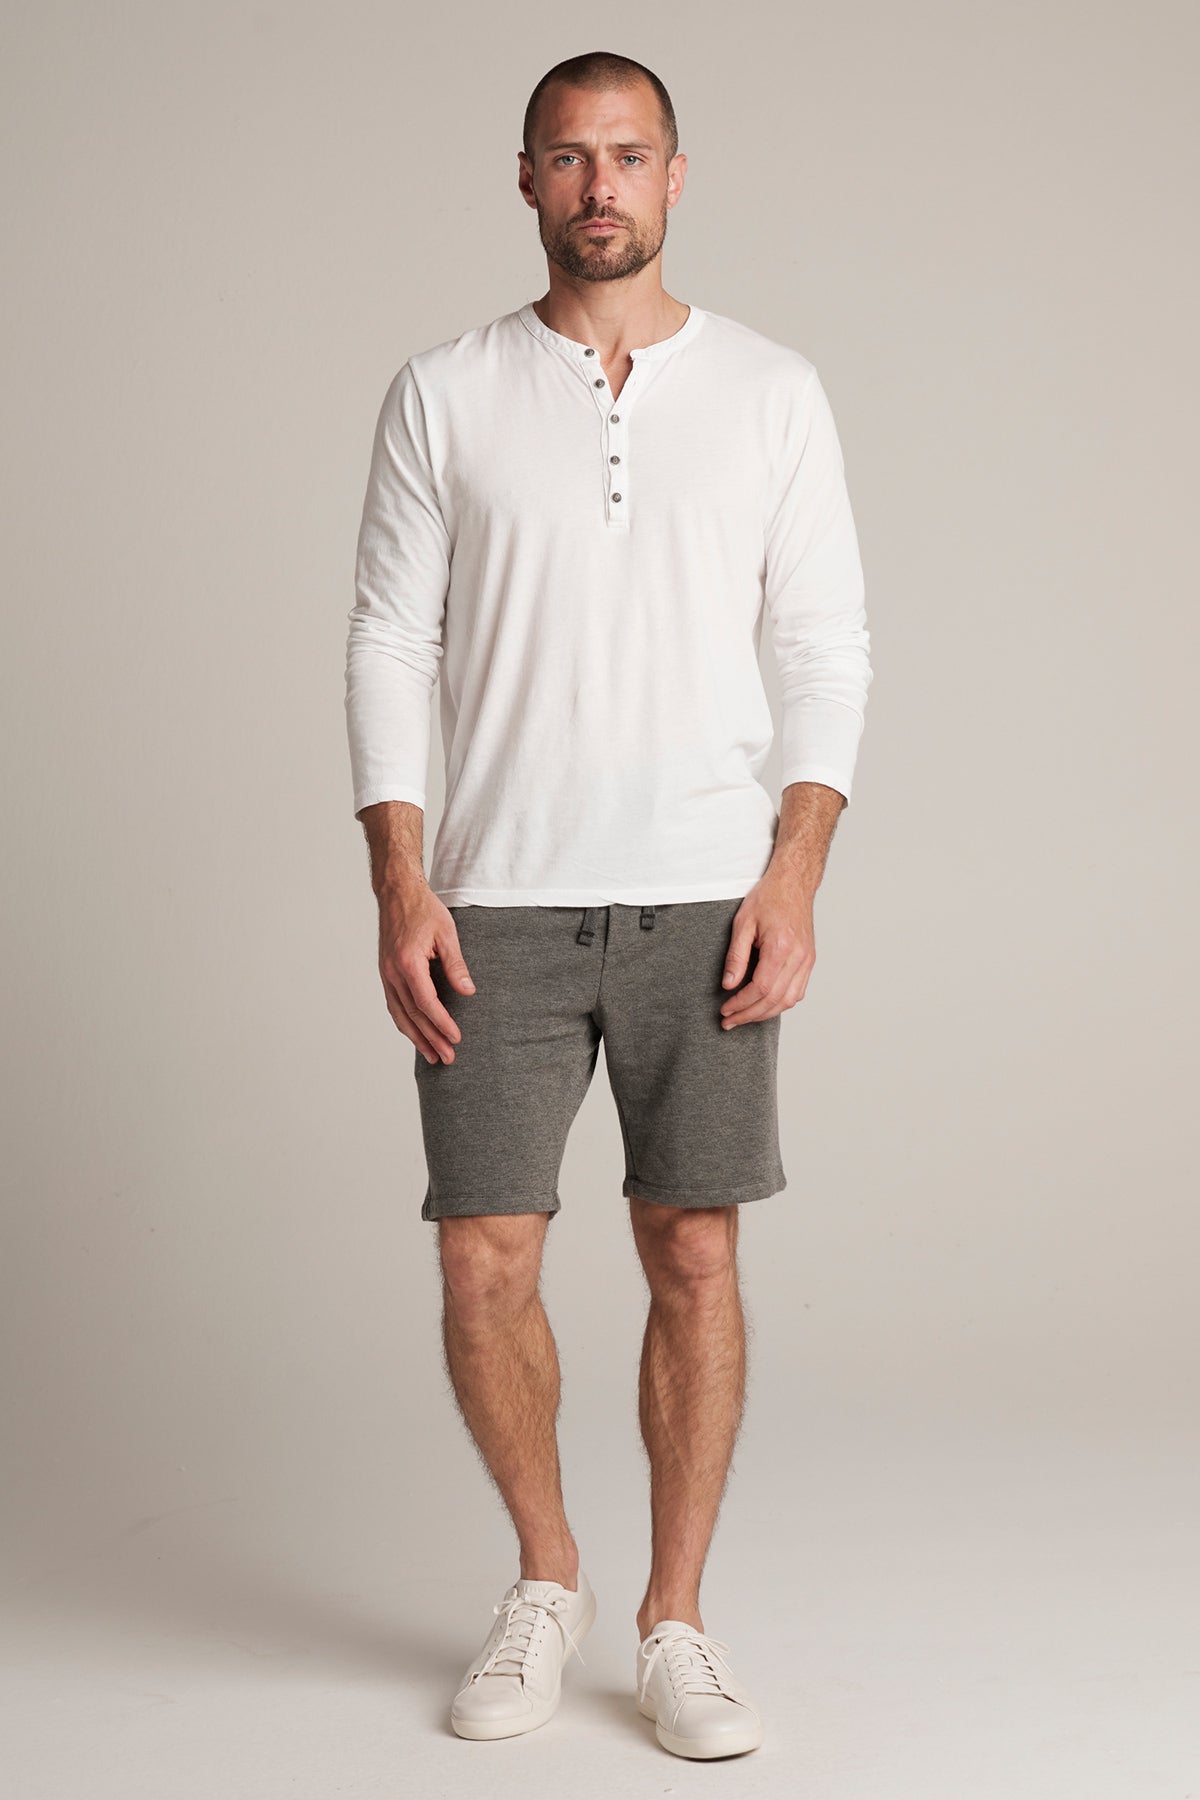   The man is wearing Velvet by Graham & Spencer shorts with an ATLAS CHARCOAL LUXE FLEECE DRAWSTRING SHORT design. 